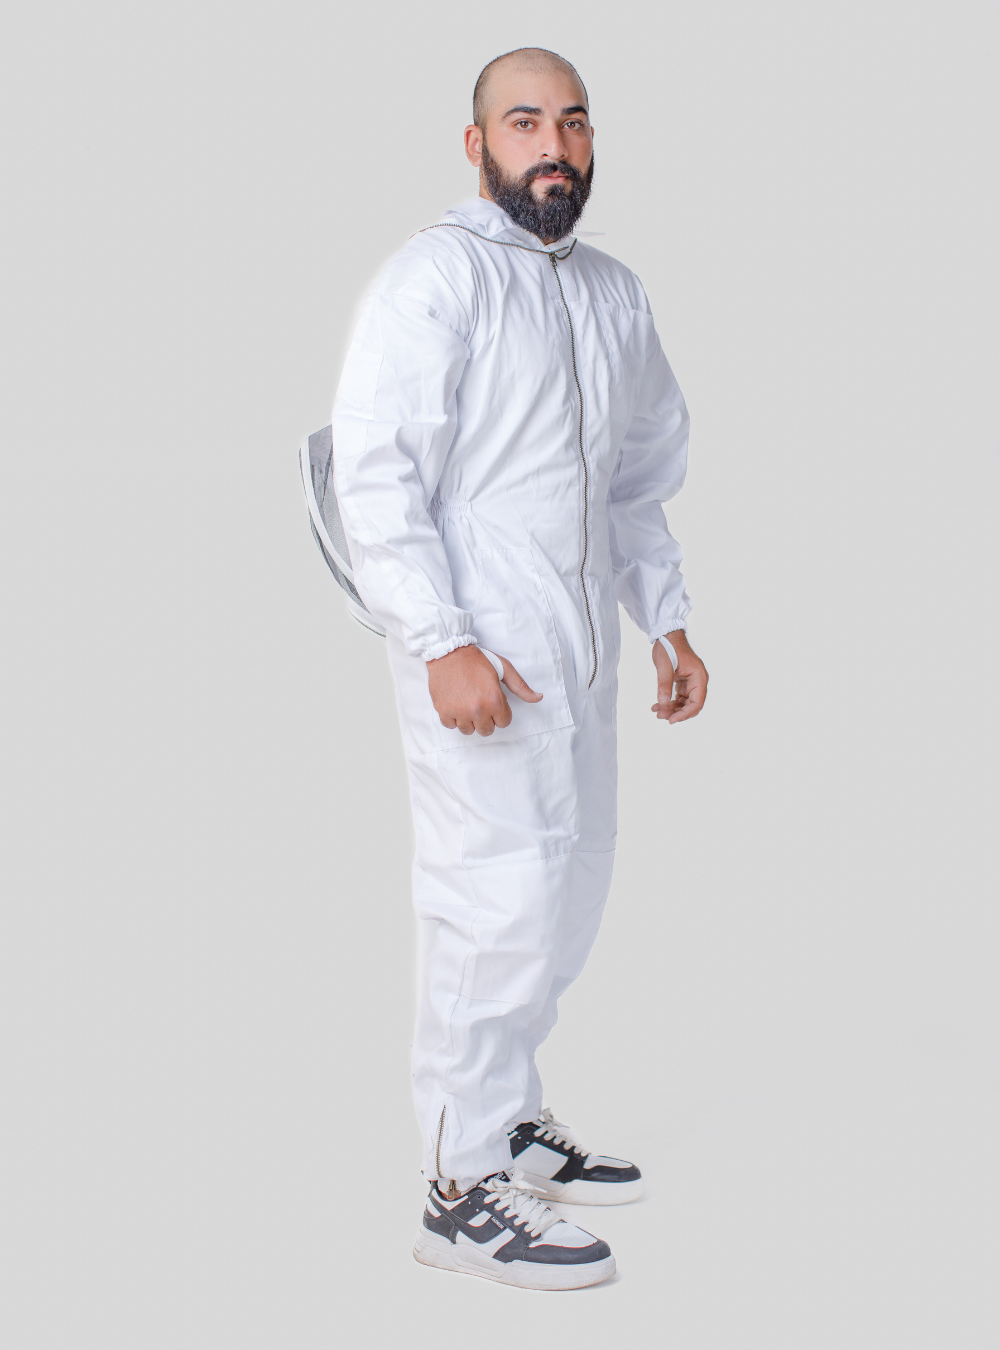 Detail view of a WhiteGuard Fencing Beekeeper Suit with a detachable round hood, matching gloves, highlighting the thick cotton material and ergonomic veil design for ease of movement